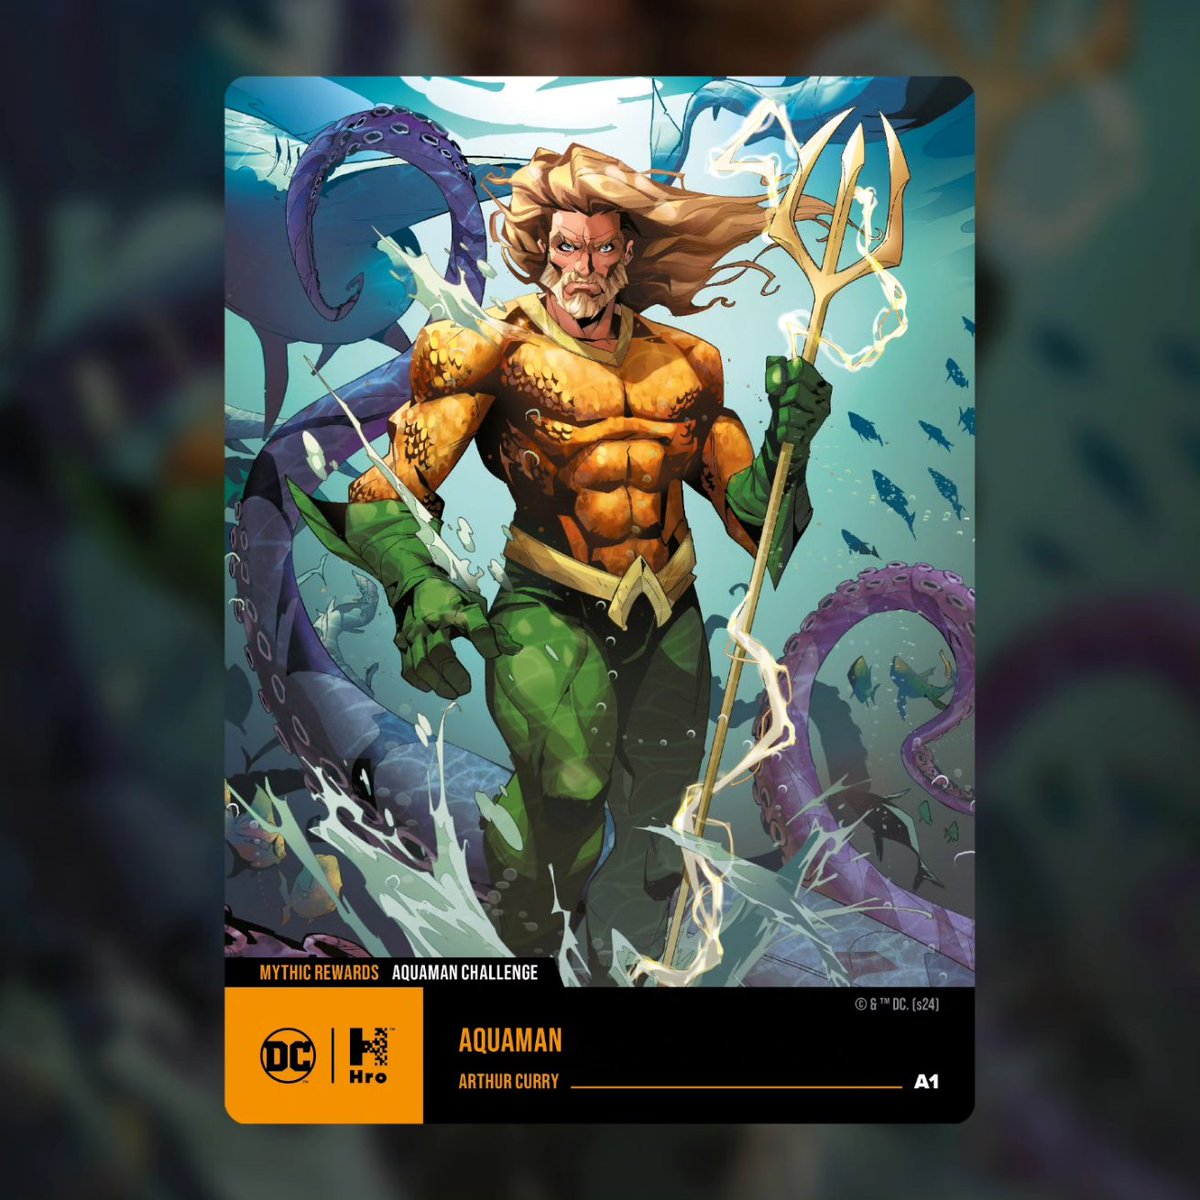 To celebrate the release of @wbpictures and @dcofficial's @aquamanmovie , @hrocards launched a brand new reward card with original artwork by me. This is my first official #aquaman piece and it was a blast working on it!Art by me,awesome colors by Pierluigi Casolino #Aquaman2